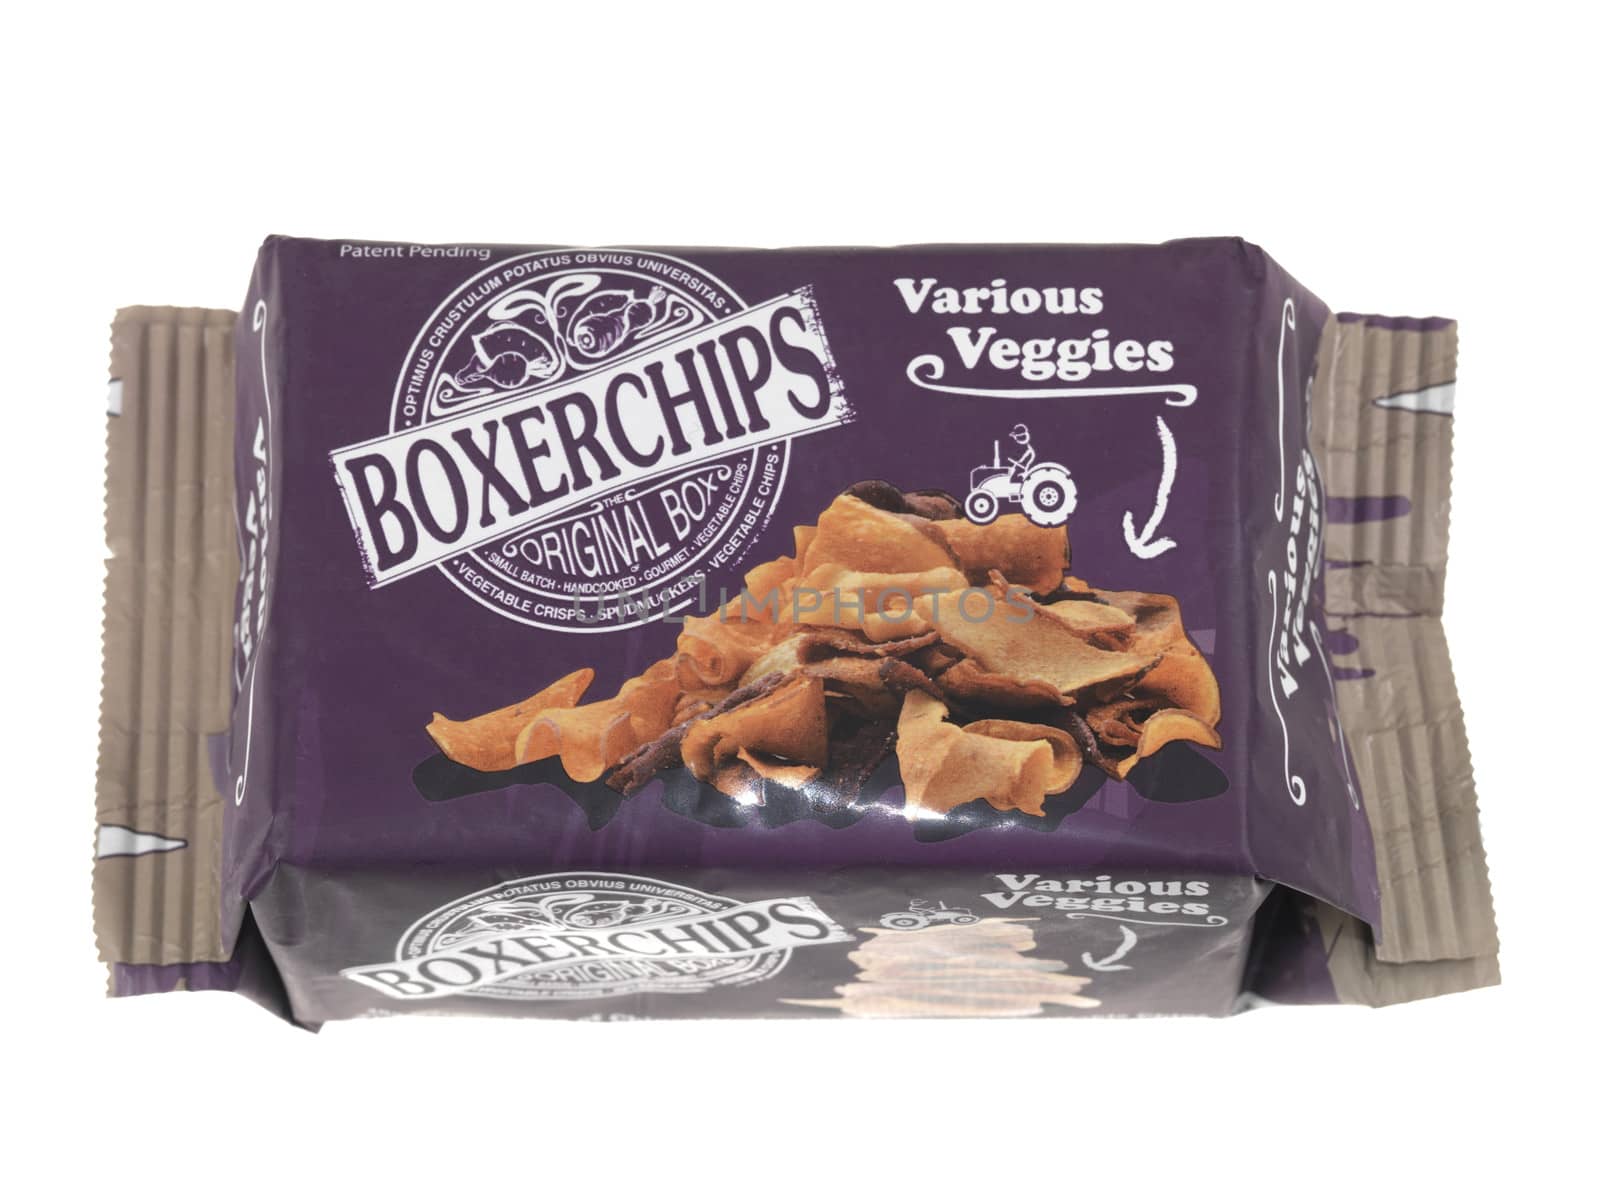 Vegetable Boxer Chips by Whiteboxmedia